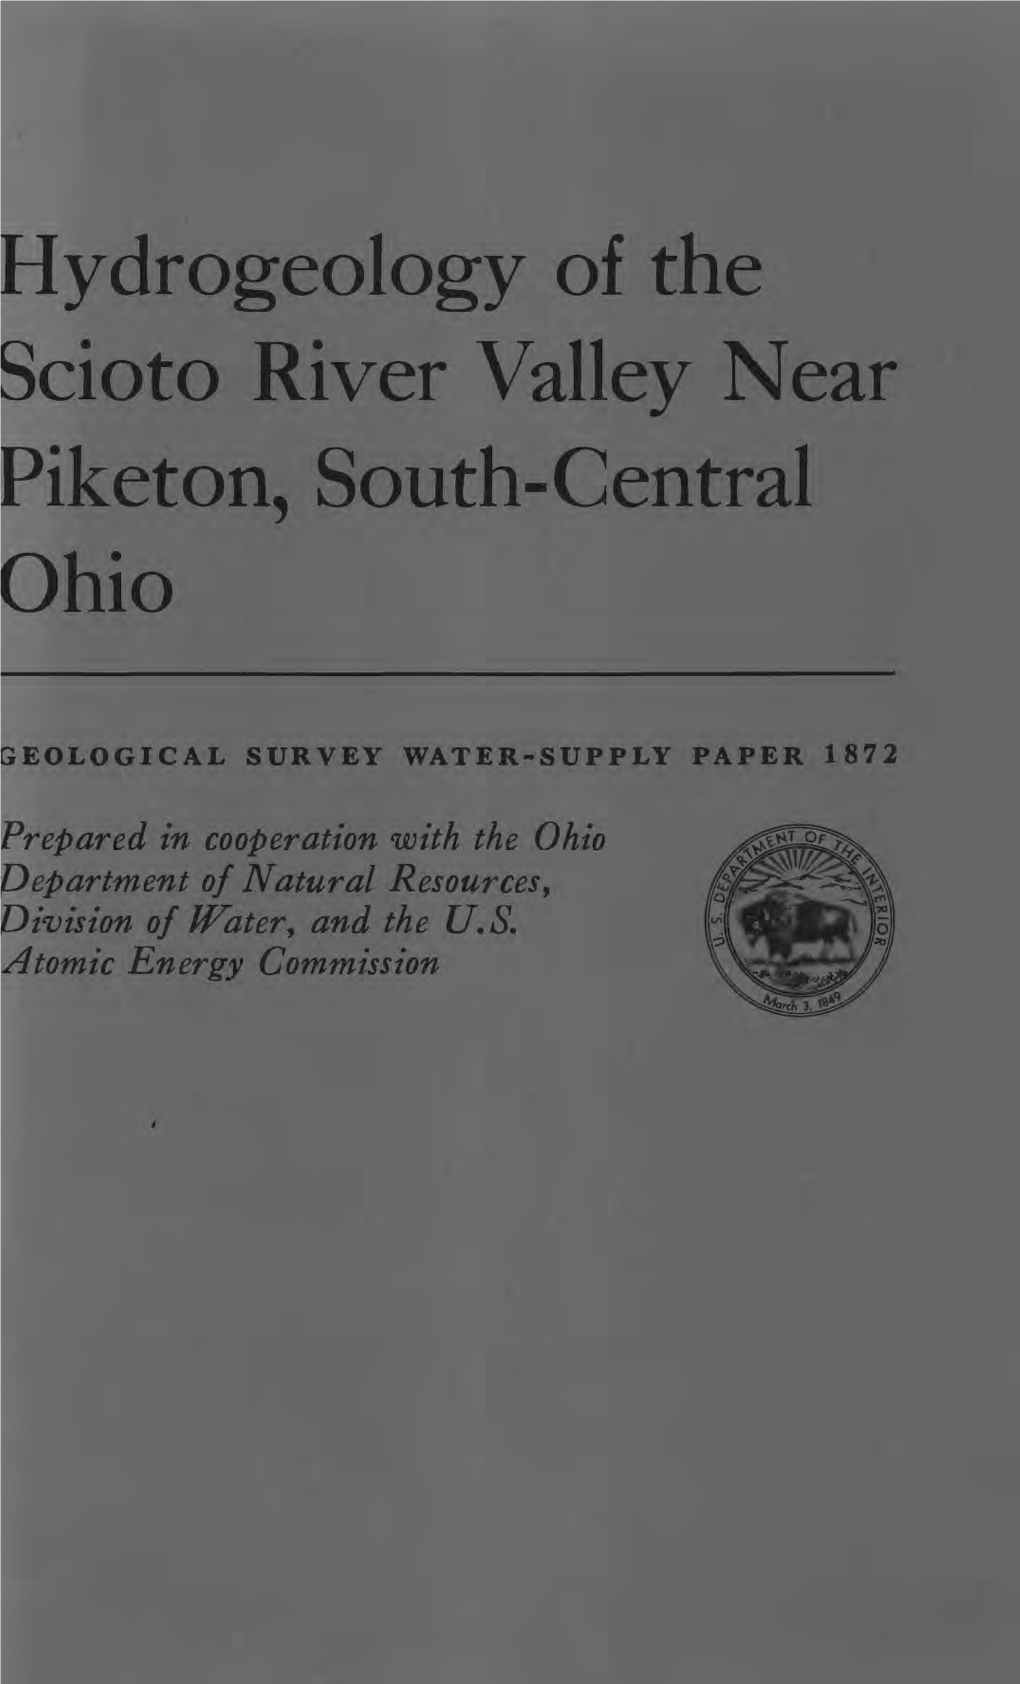 Hydrogeology of the Scioto River Valley Near Piketon, South-Central Ohio